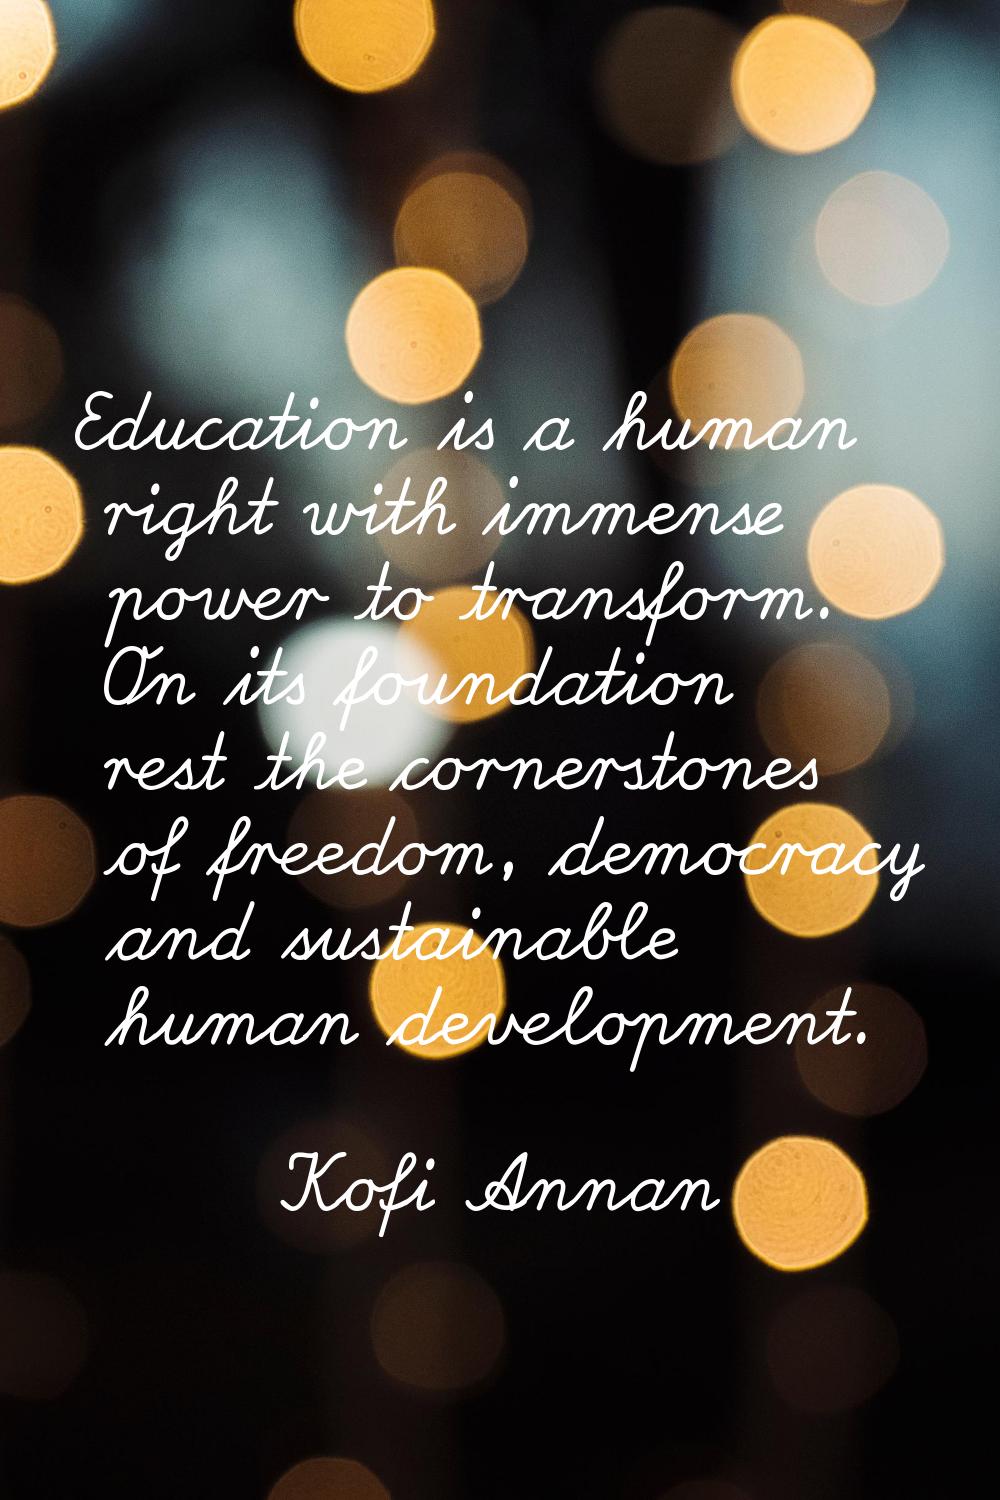 Education is a human right with immense power to transform. On its foundation rest the cornerstones